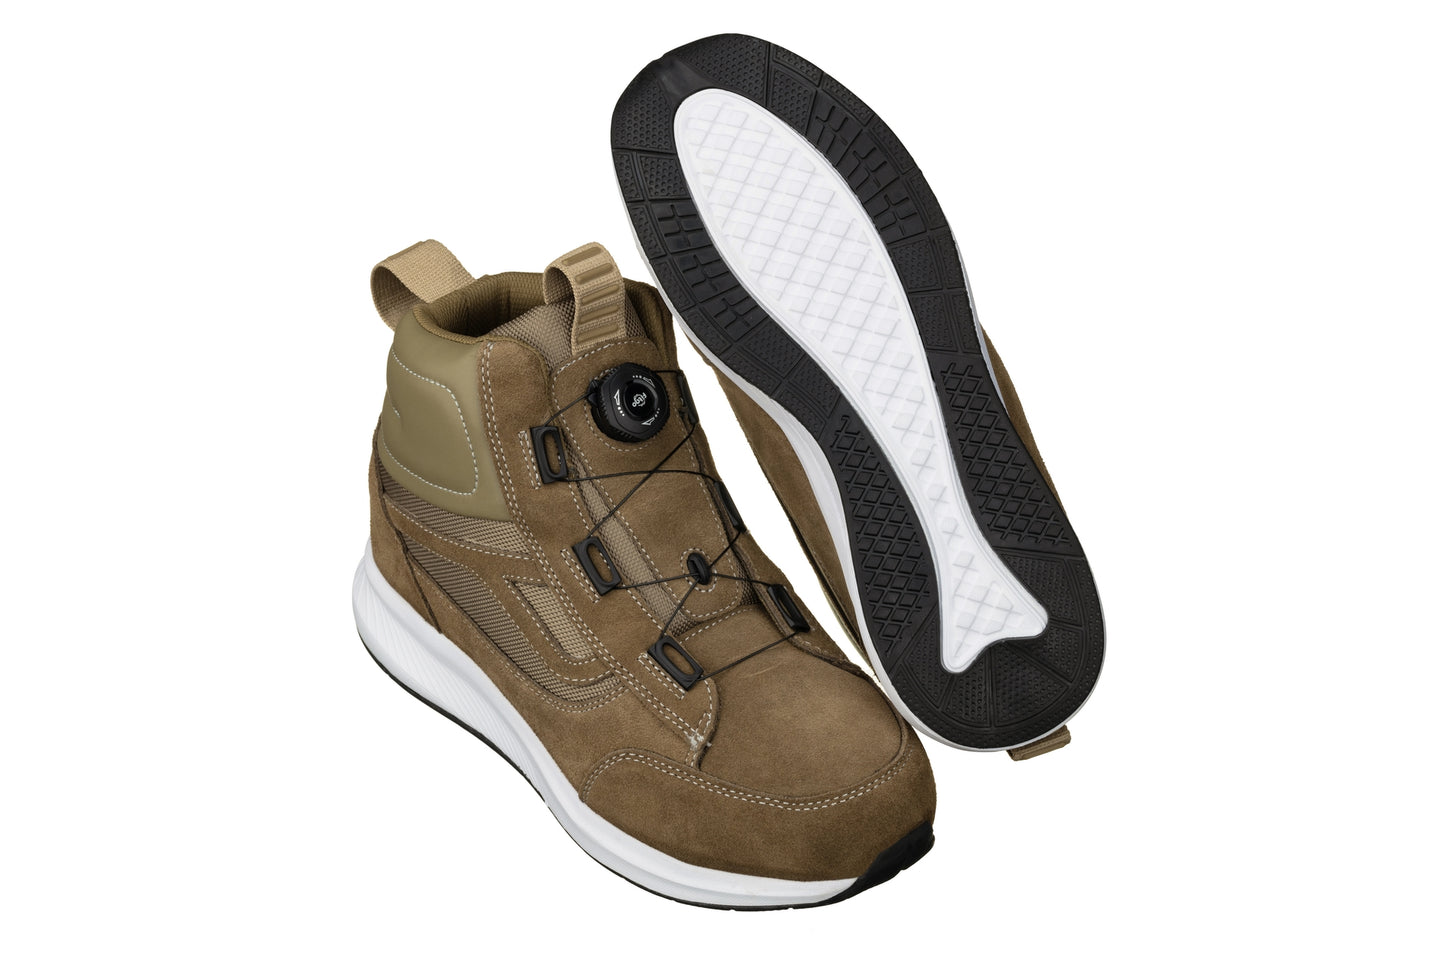 Elevator shoes height increase CALTO - S3222 - 3.2 Inches Taller (Khaki Brown) - Lightweight Sneakers